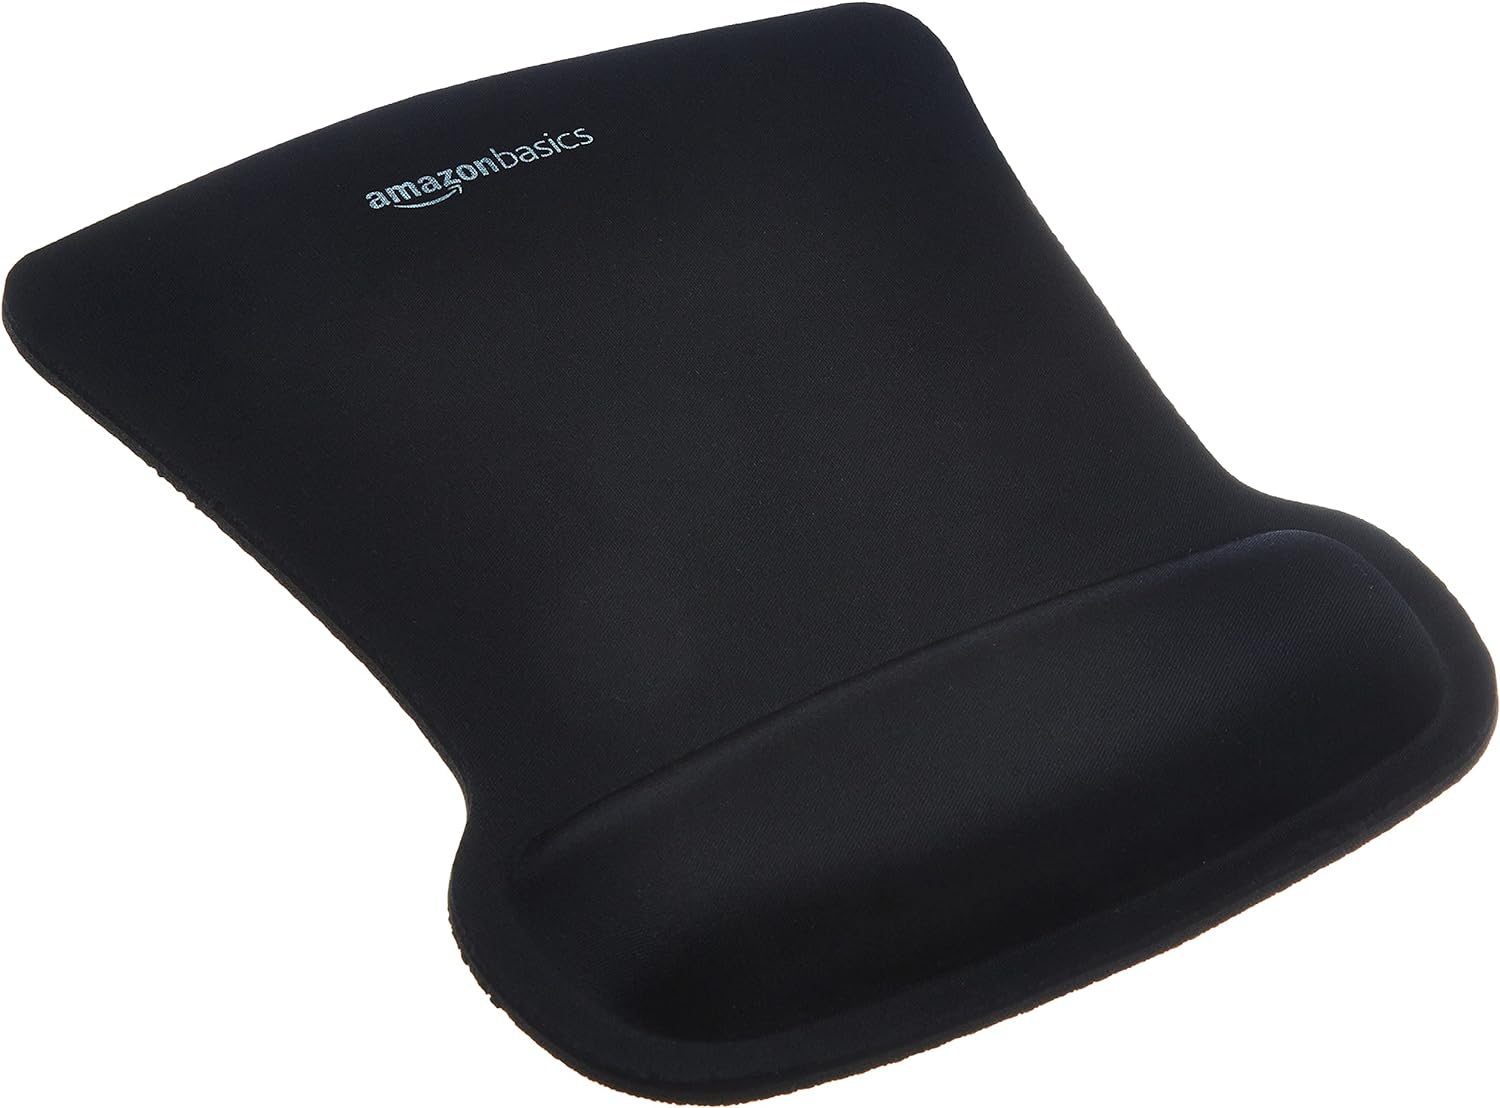 The Mousepad That Saved My Wrist as a Software Developer